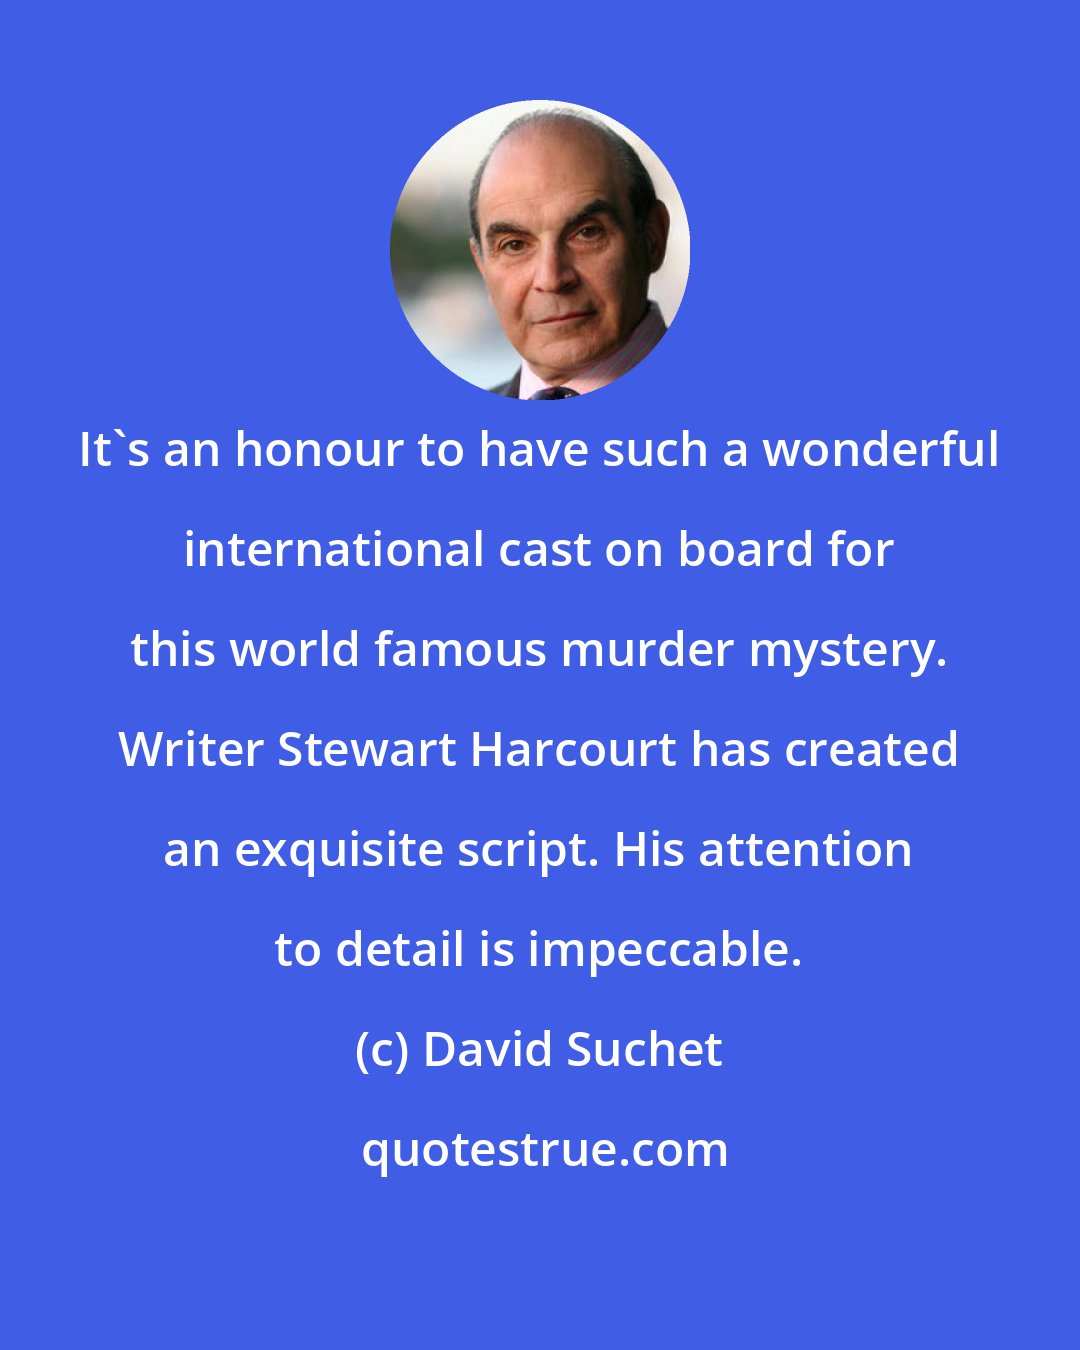 David Suchet: It's an honour to have such a wonderful international cast on board for this world famous murder mystery. Writer Stewart Harcourt has created an exquisite script. His attention to detail is impeccable.